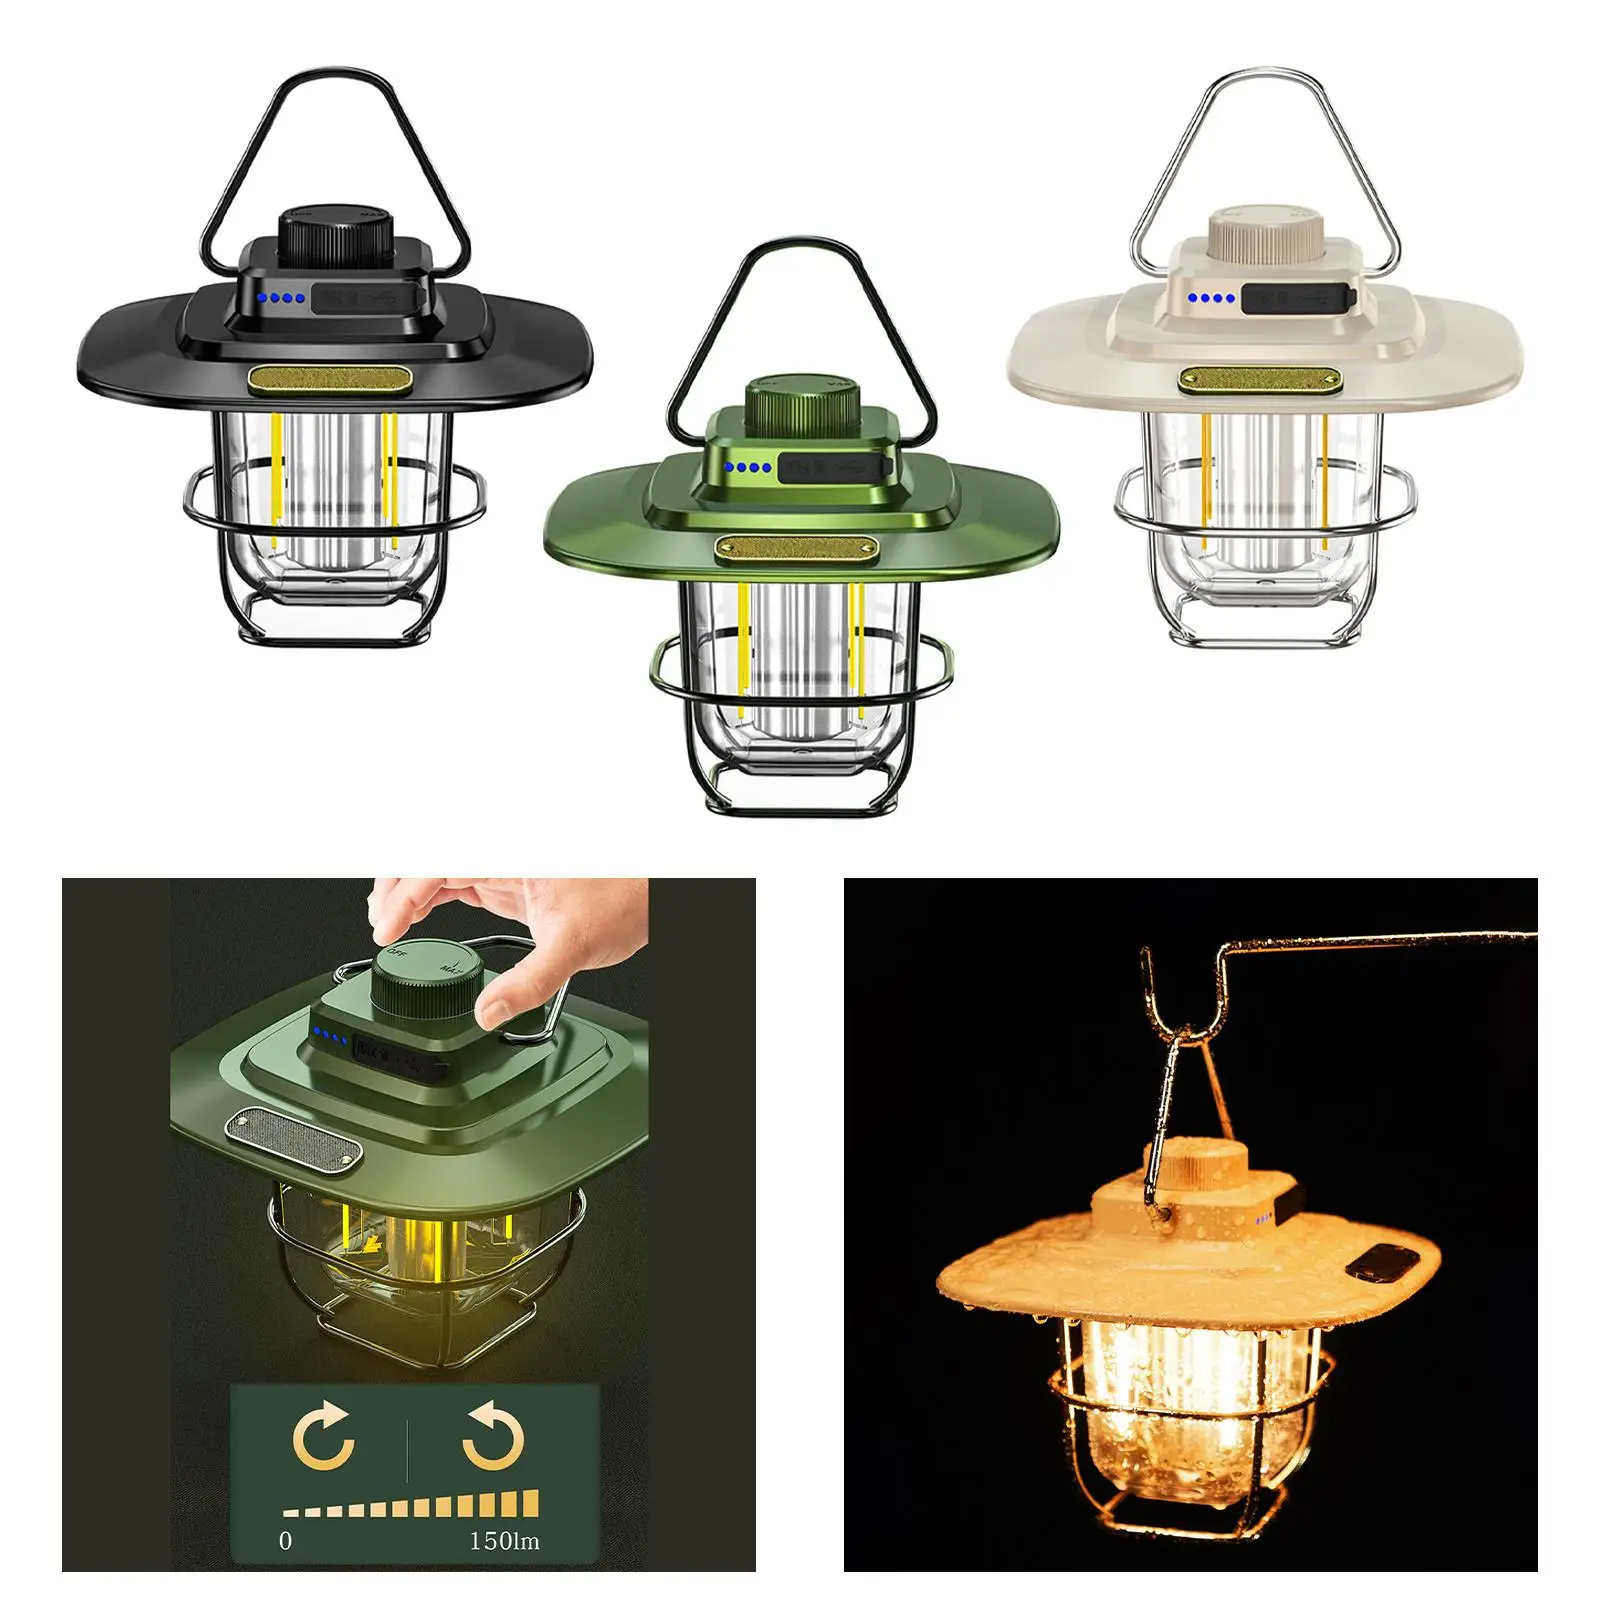 Stainless Steel LED Camping Lantern Night Light 2 Light Modes Lightweight Rechargeable Vintage Style Hanging for Hiking Garden